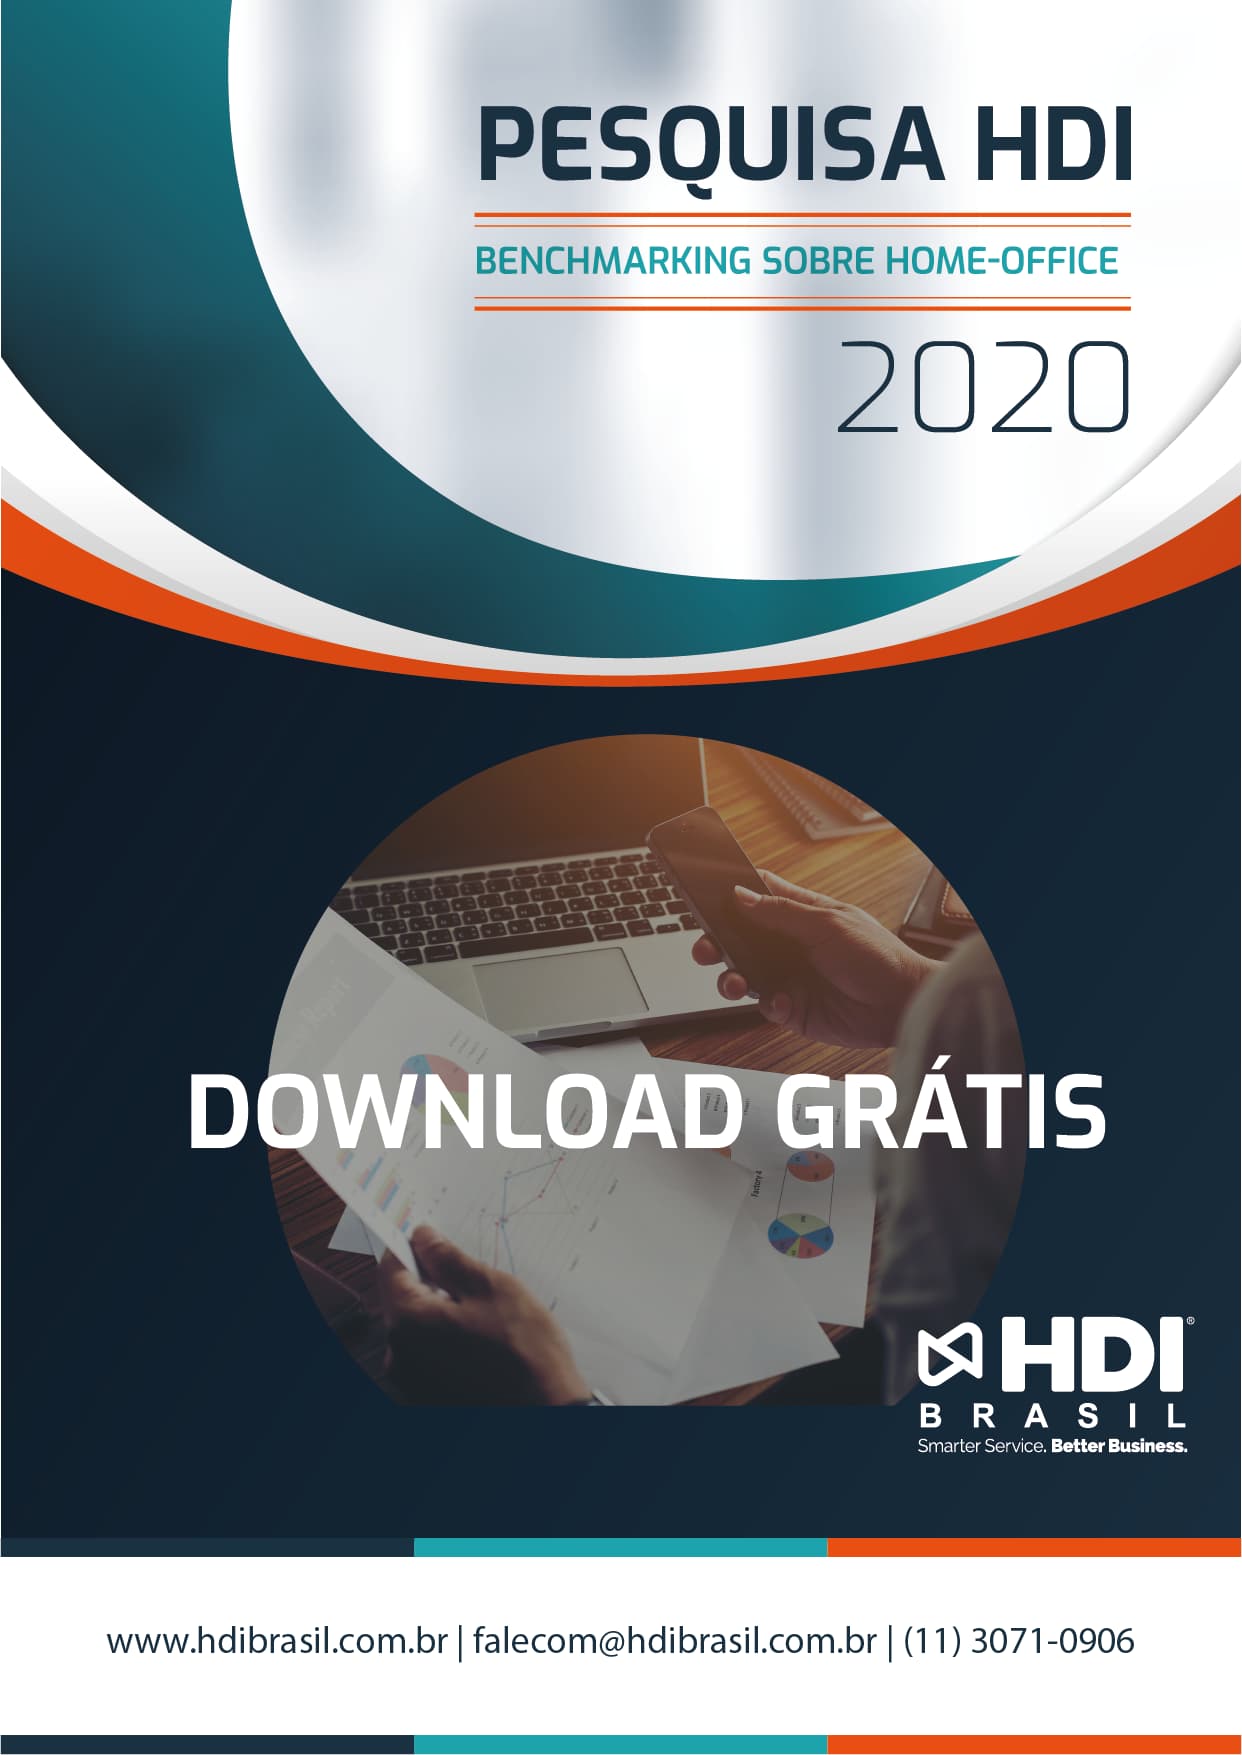 PESQUISA HDI: Benchmarking sobre home office 2020